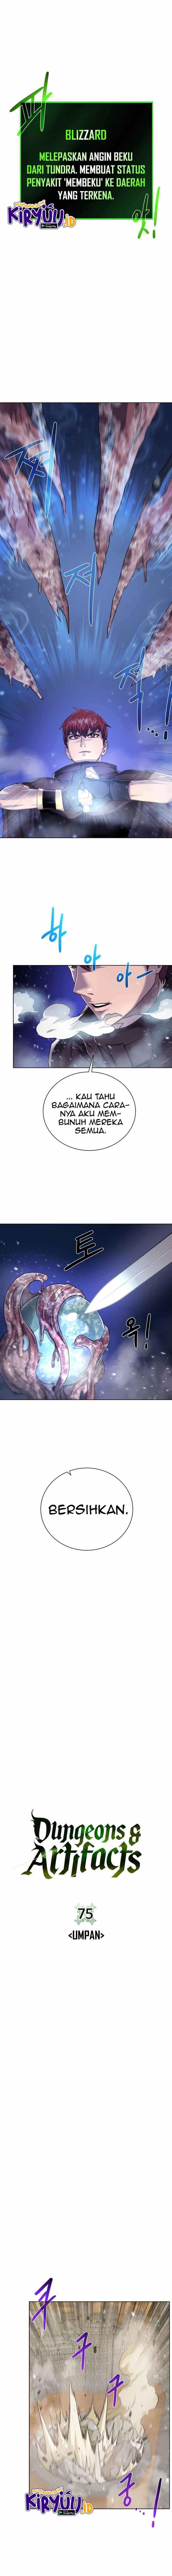 Dungeon and Artifact Chapter 75